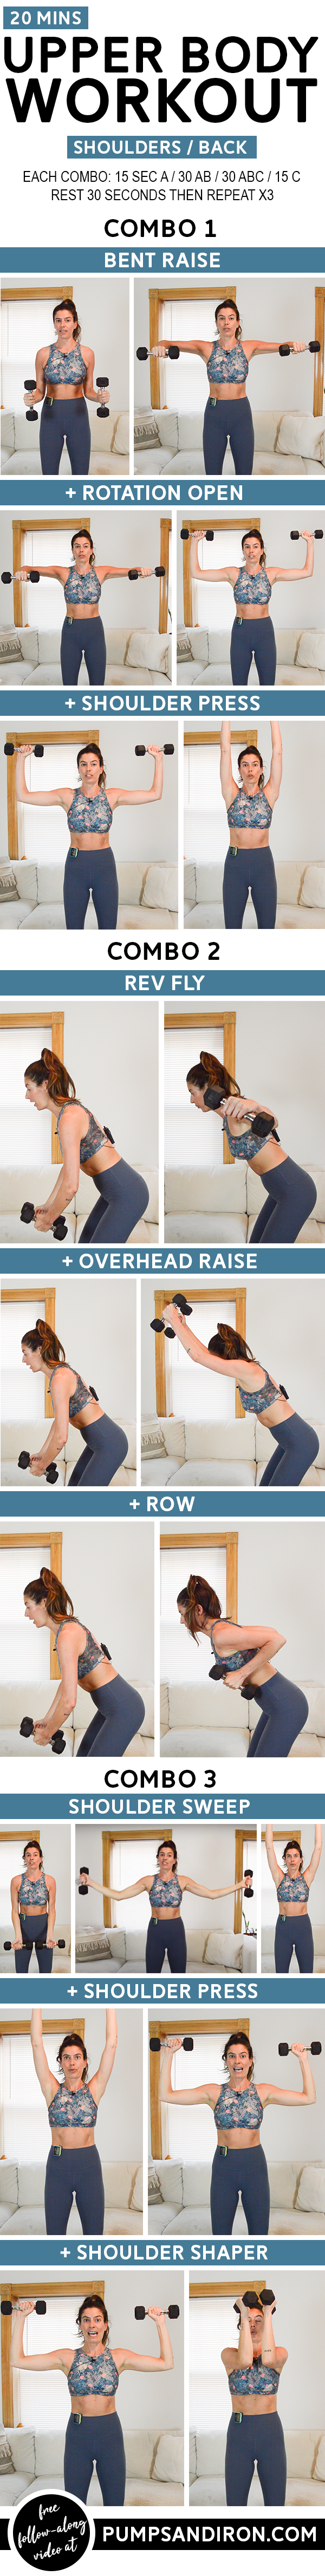 Back & Shoulders Focus Workout (Build a Combo) - You'll need a pair of dumbbells for this upper body workout focusing on shoulders and back. #upperbodyworkout #workoutvideo